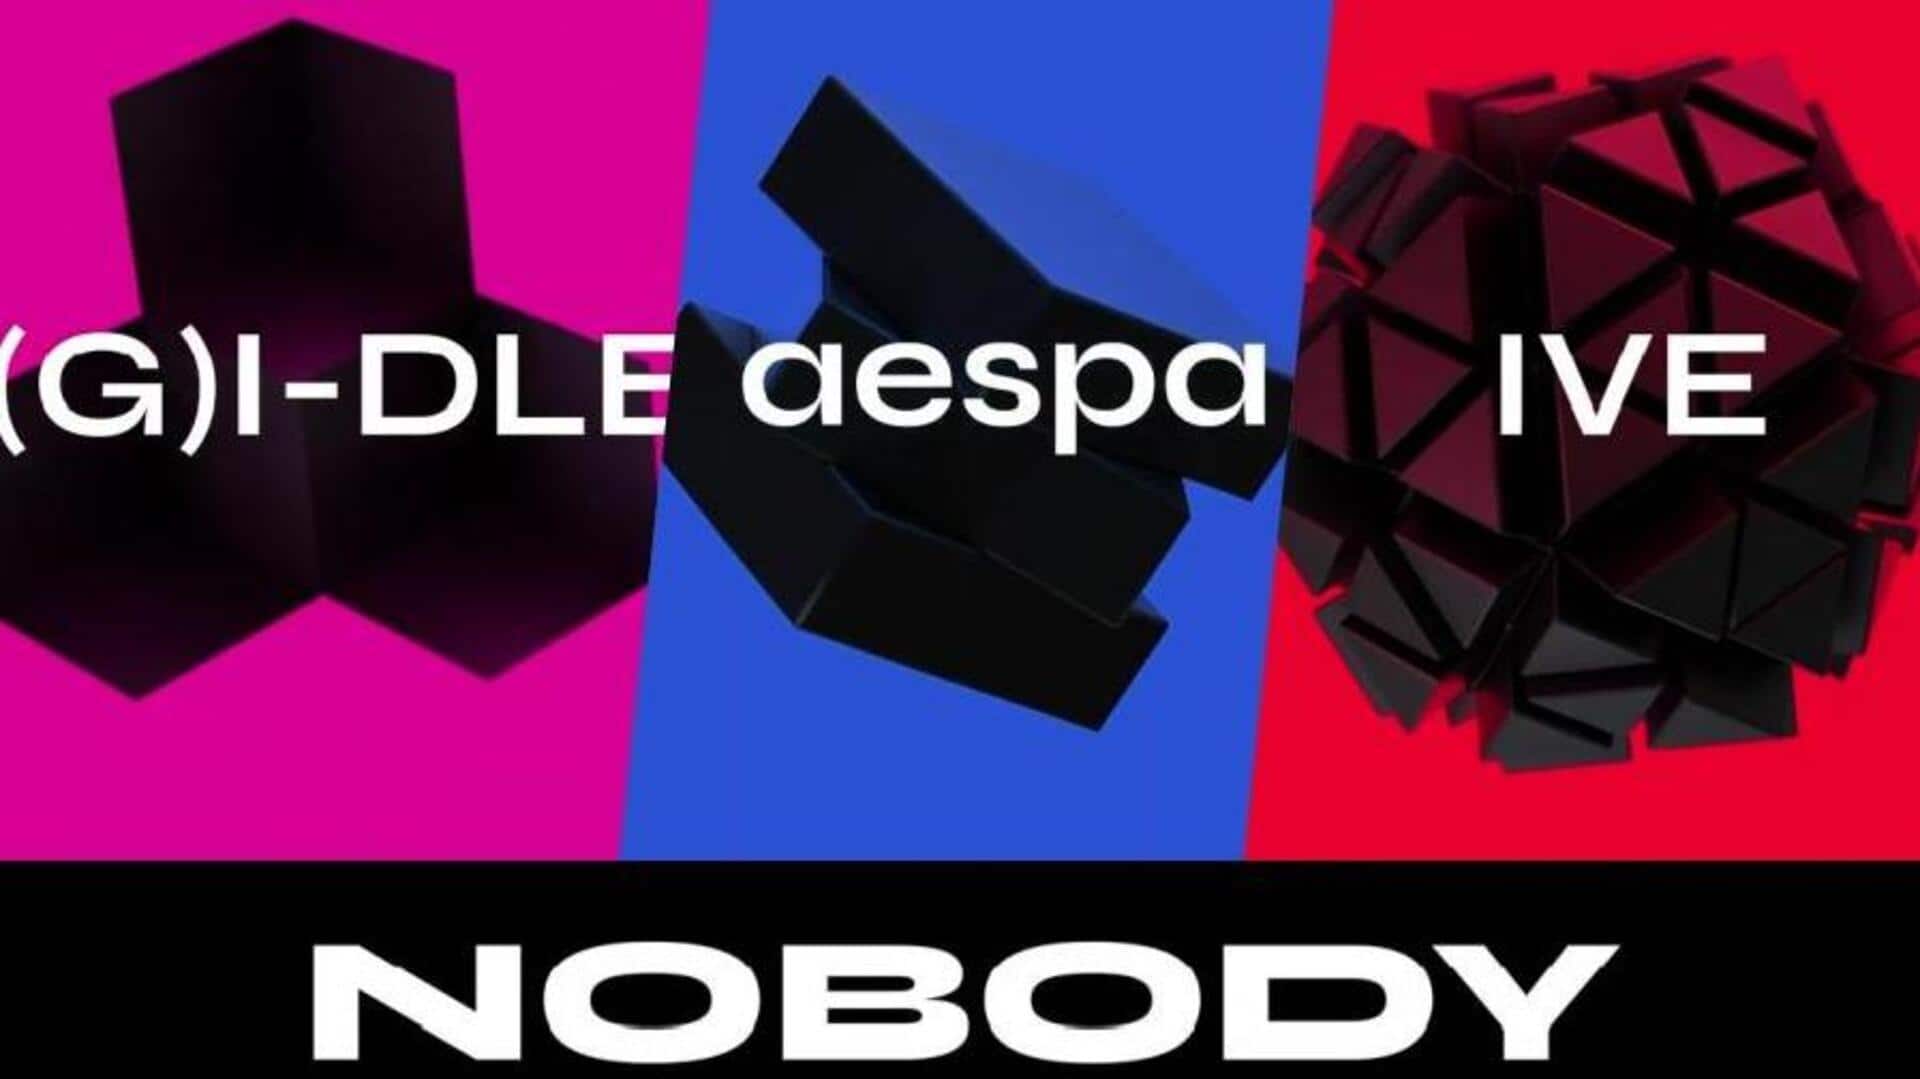 'NOBODY': (G)I-DLE, aespa, IVE announce collaboration; teaser unveiled